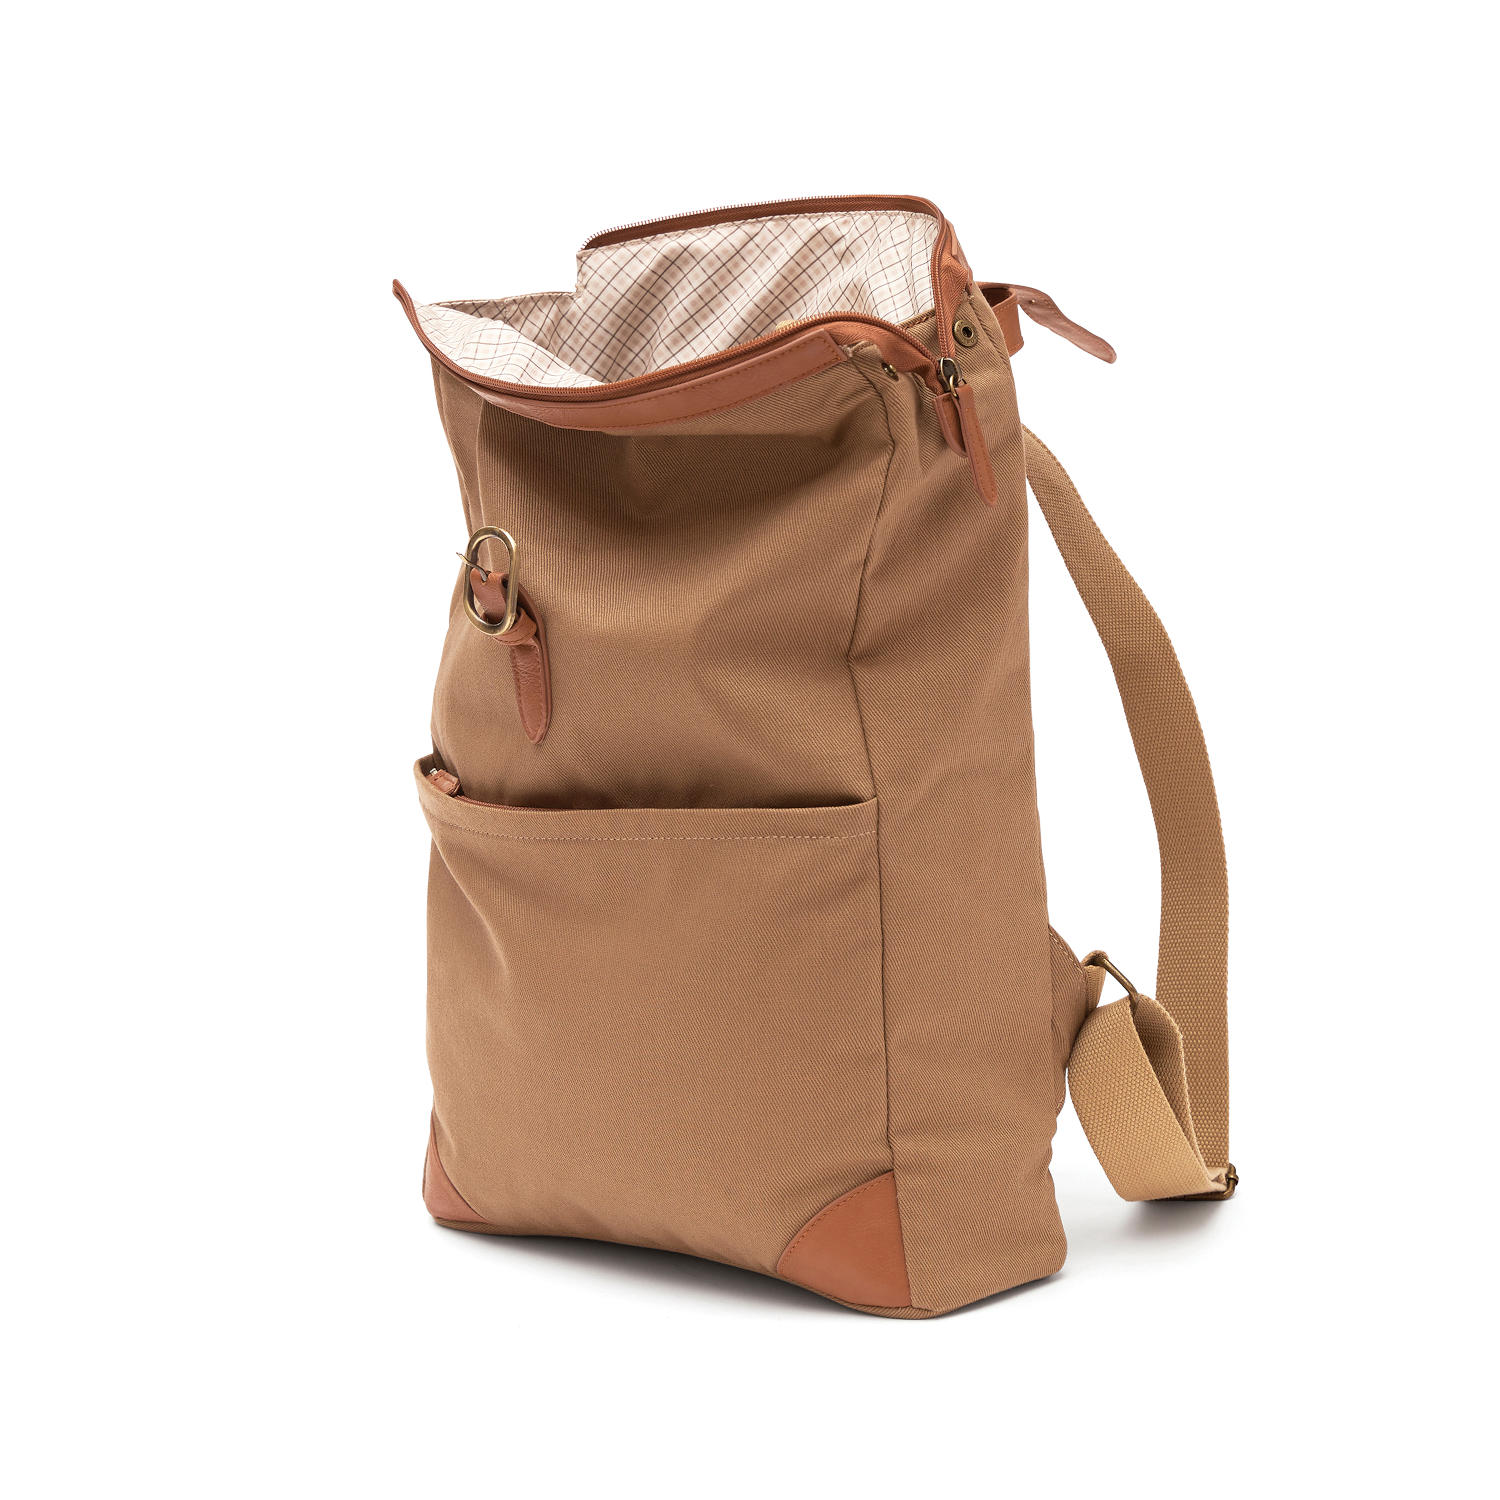 Sloane Recycled Backpack From Vinga